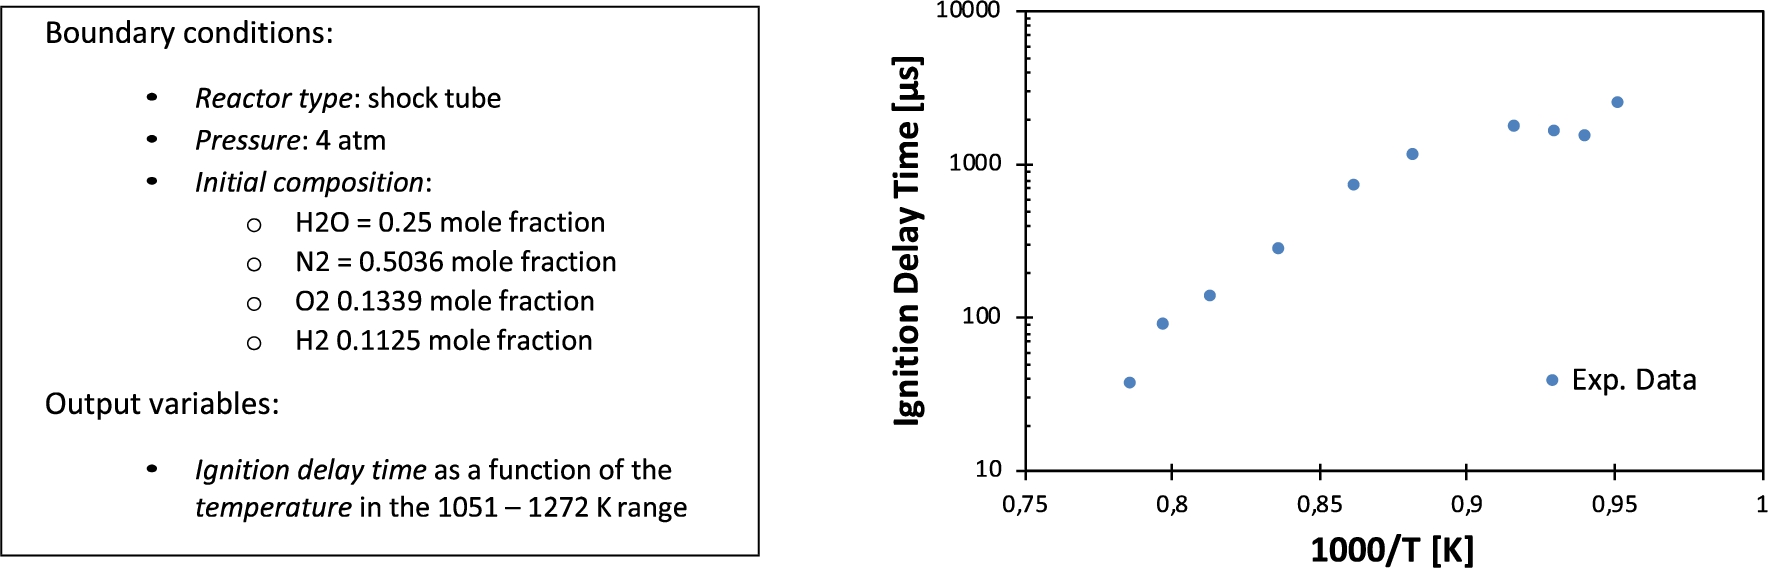 On the left, boundary conditions and output variables of the experiment 10.24388x10000021_x, extracted from [55] and available in the ReSpecTh repository [54]. On the right, the output variable ignition delay time is plotted with respect to the inverse of the temperature in a logarithmic scale, as generally accepted practice in the domain.